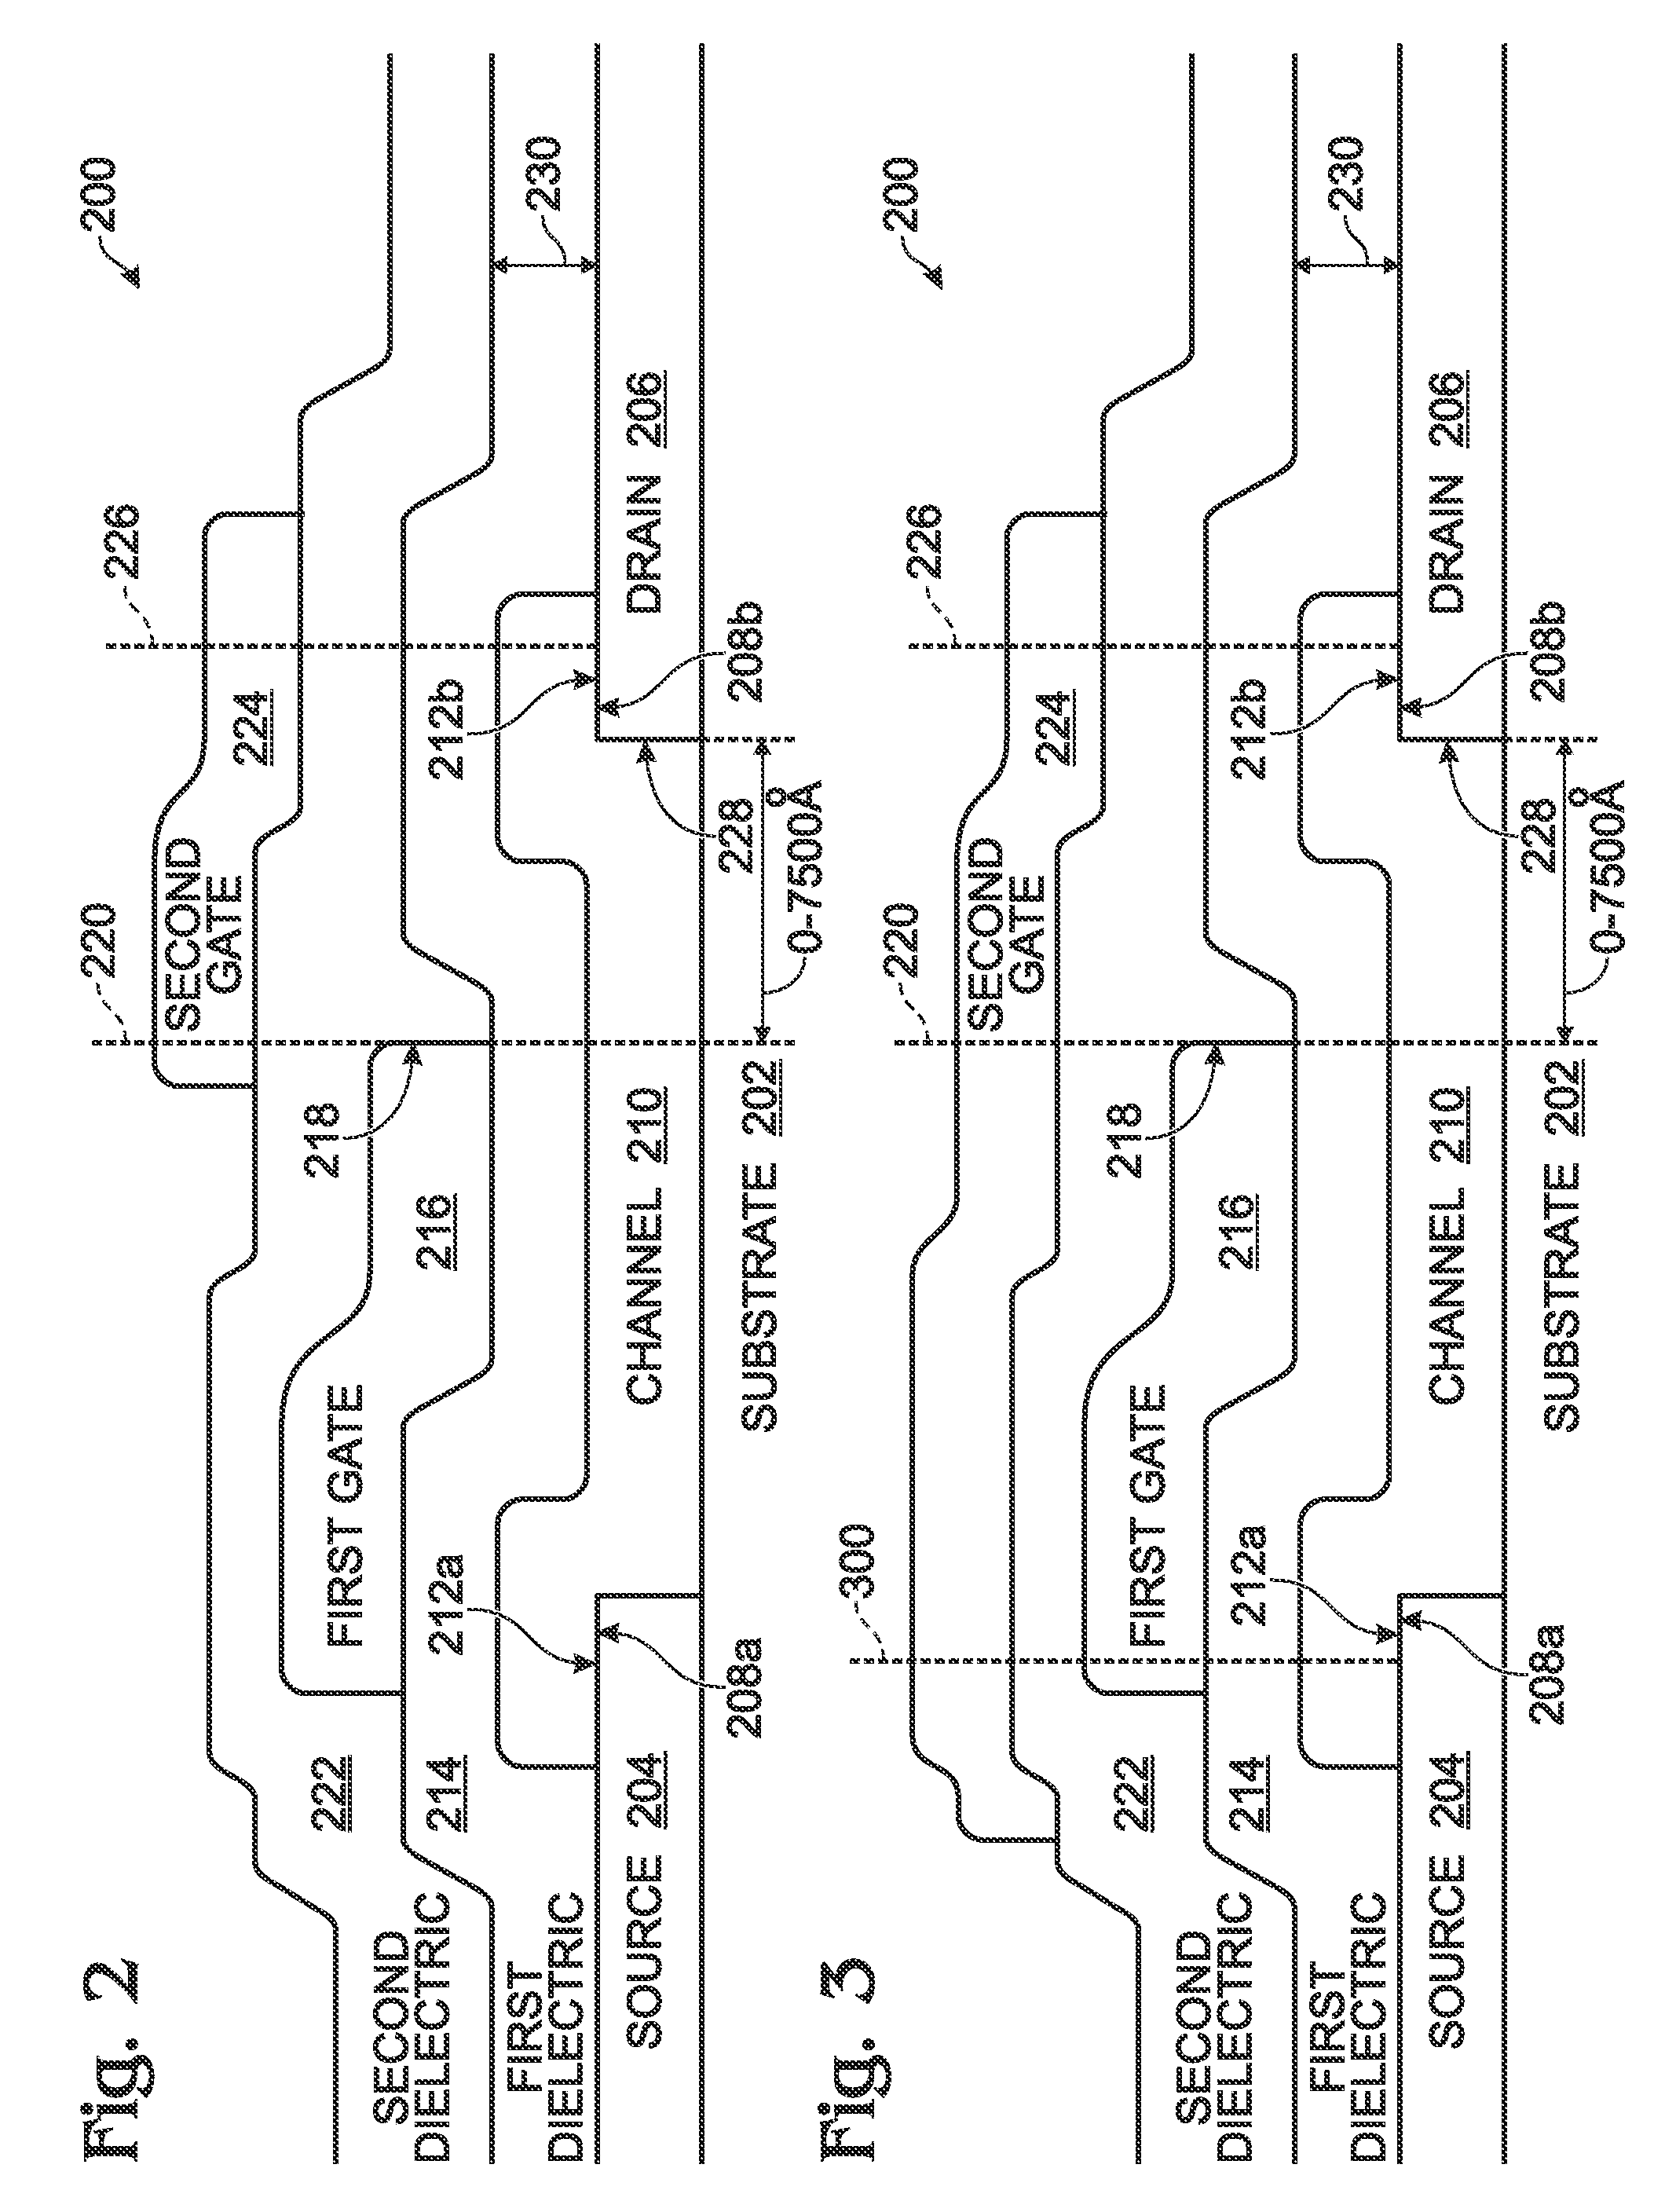 Top Gate Thin Film Transistor with Independent Field Control for Off-Current Suppression